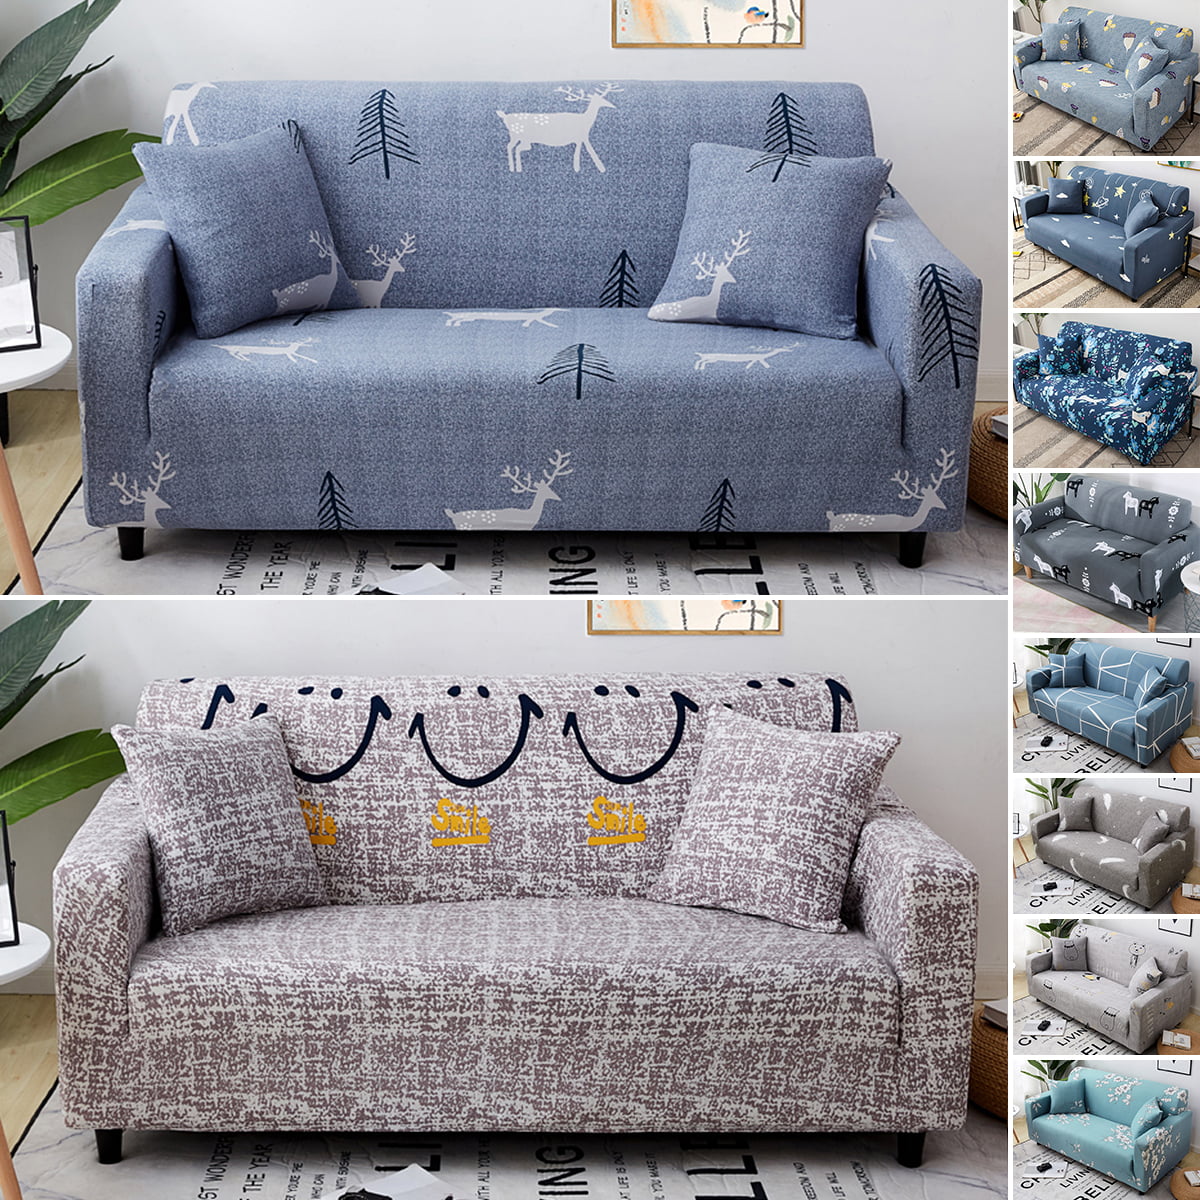 Details about   Stretch Couch Cover Loveseat Covers for 2 Cushion Couch Loveseat Slipcover|Sofa 